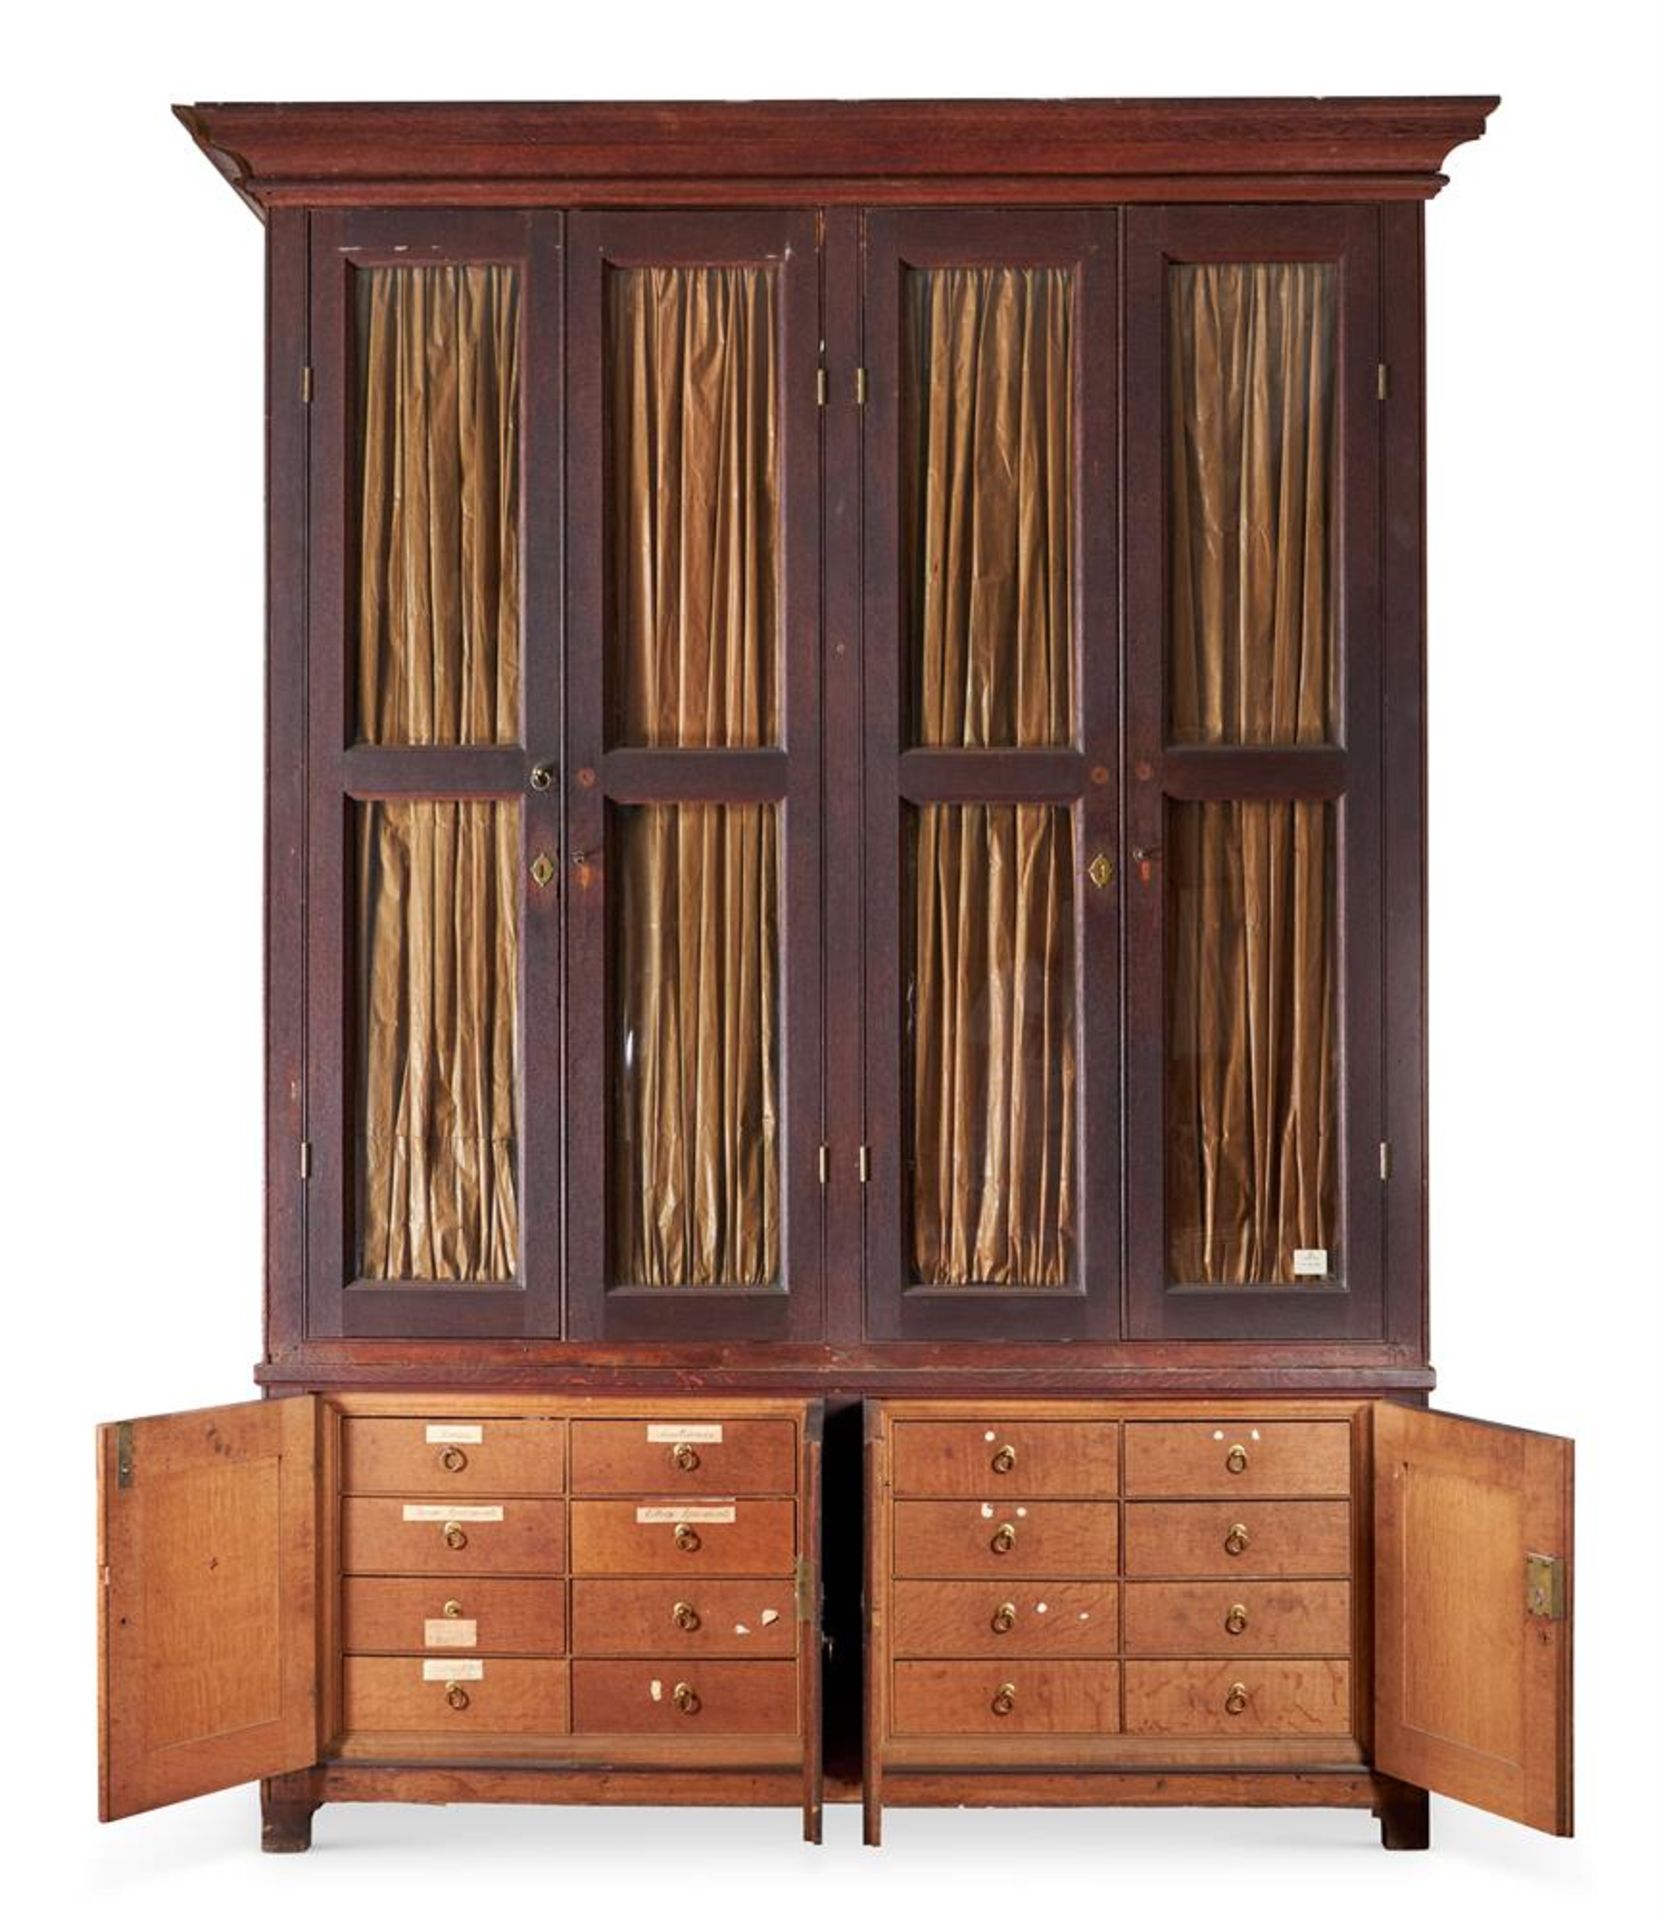 A GEORGE I OAK BOOKCASE POSSIBLY BY THOMAS RIPLEY, CIRCA 1725 - Image 2 of 10